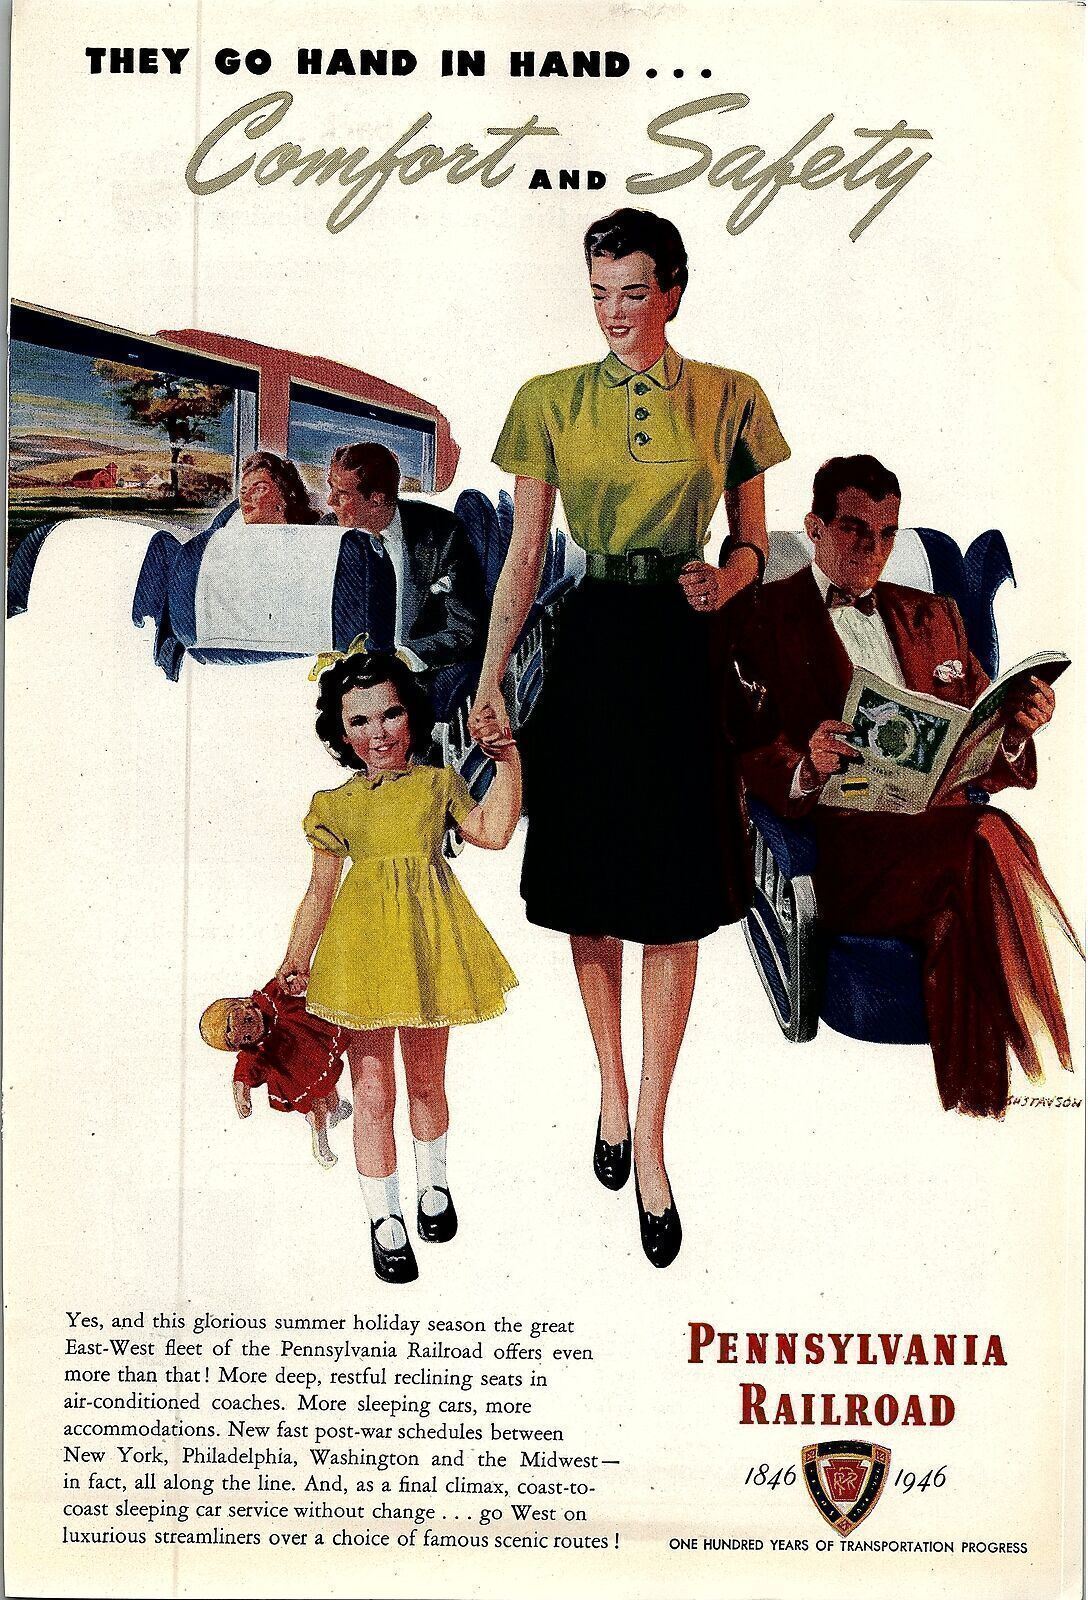 1950s PENNSYLVANIA RAILROAD COMFORT AND SAFETY MAGAZINE AD 26-14